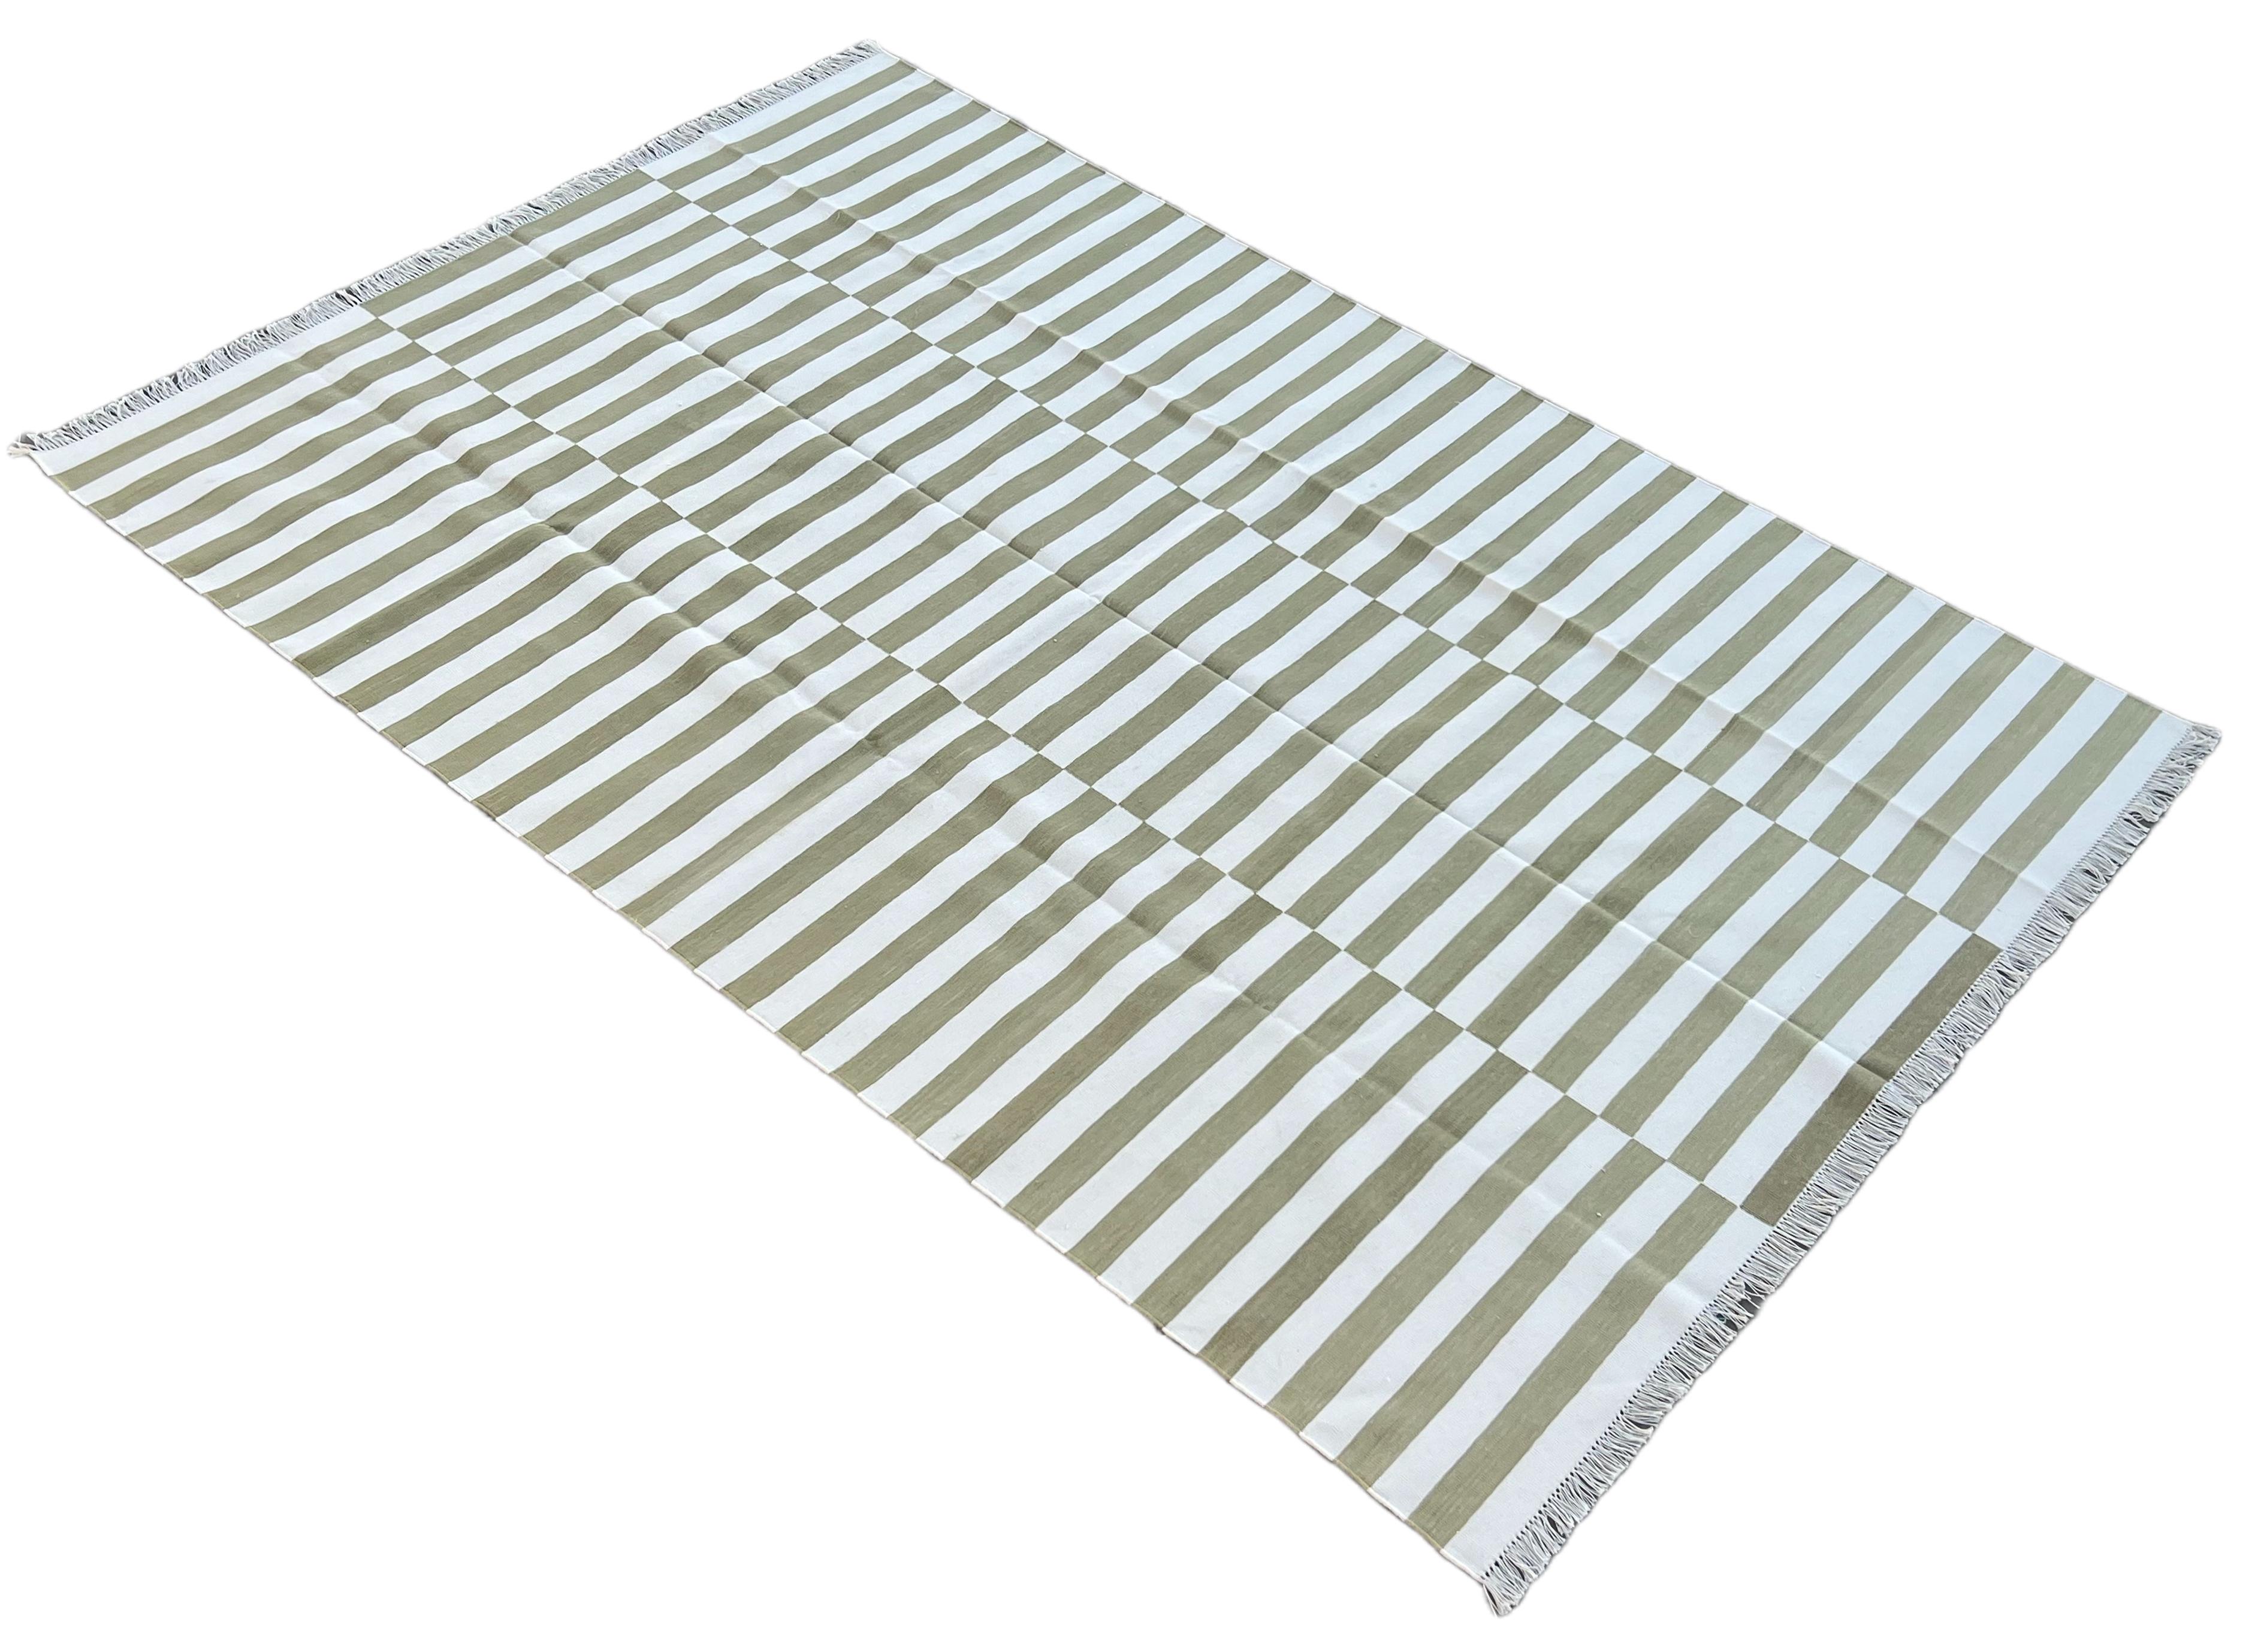 Handmade Cotton Area Flat Weave Rug, Green And White Striped Indian Dhurrie Rug For Sale 5